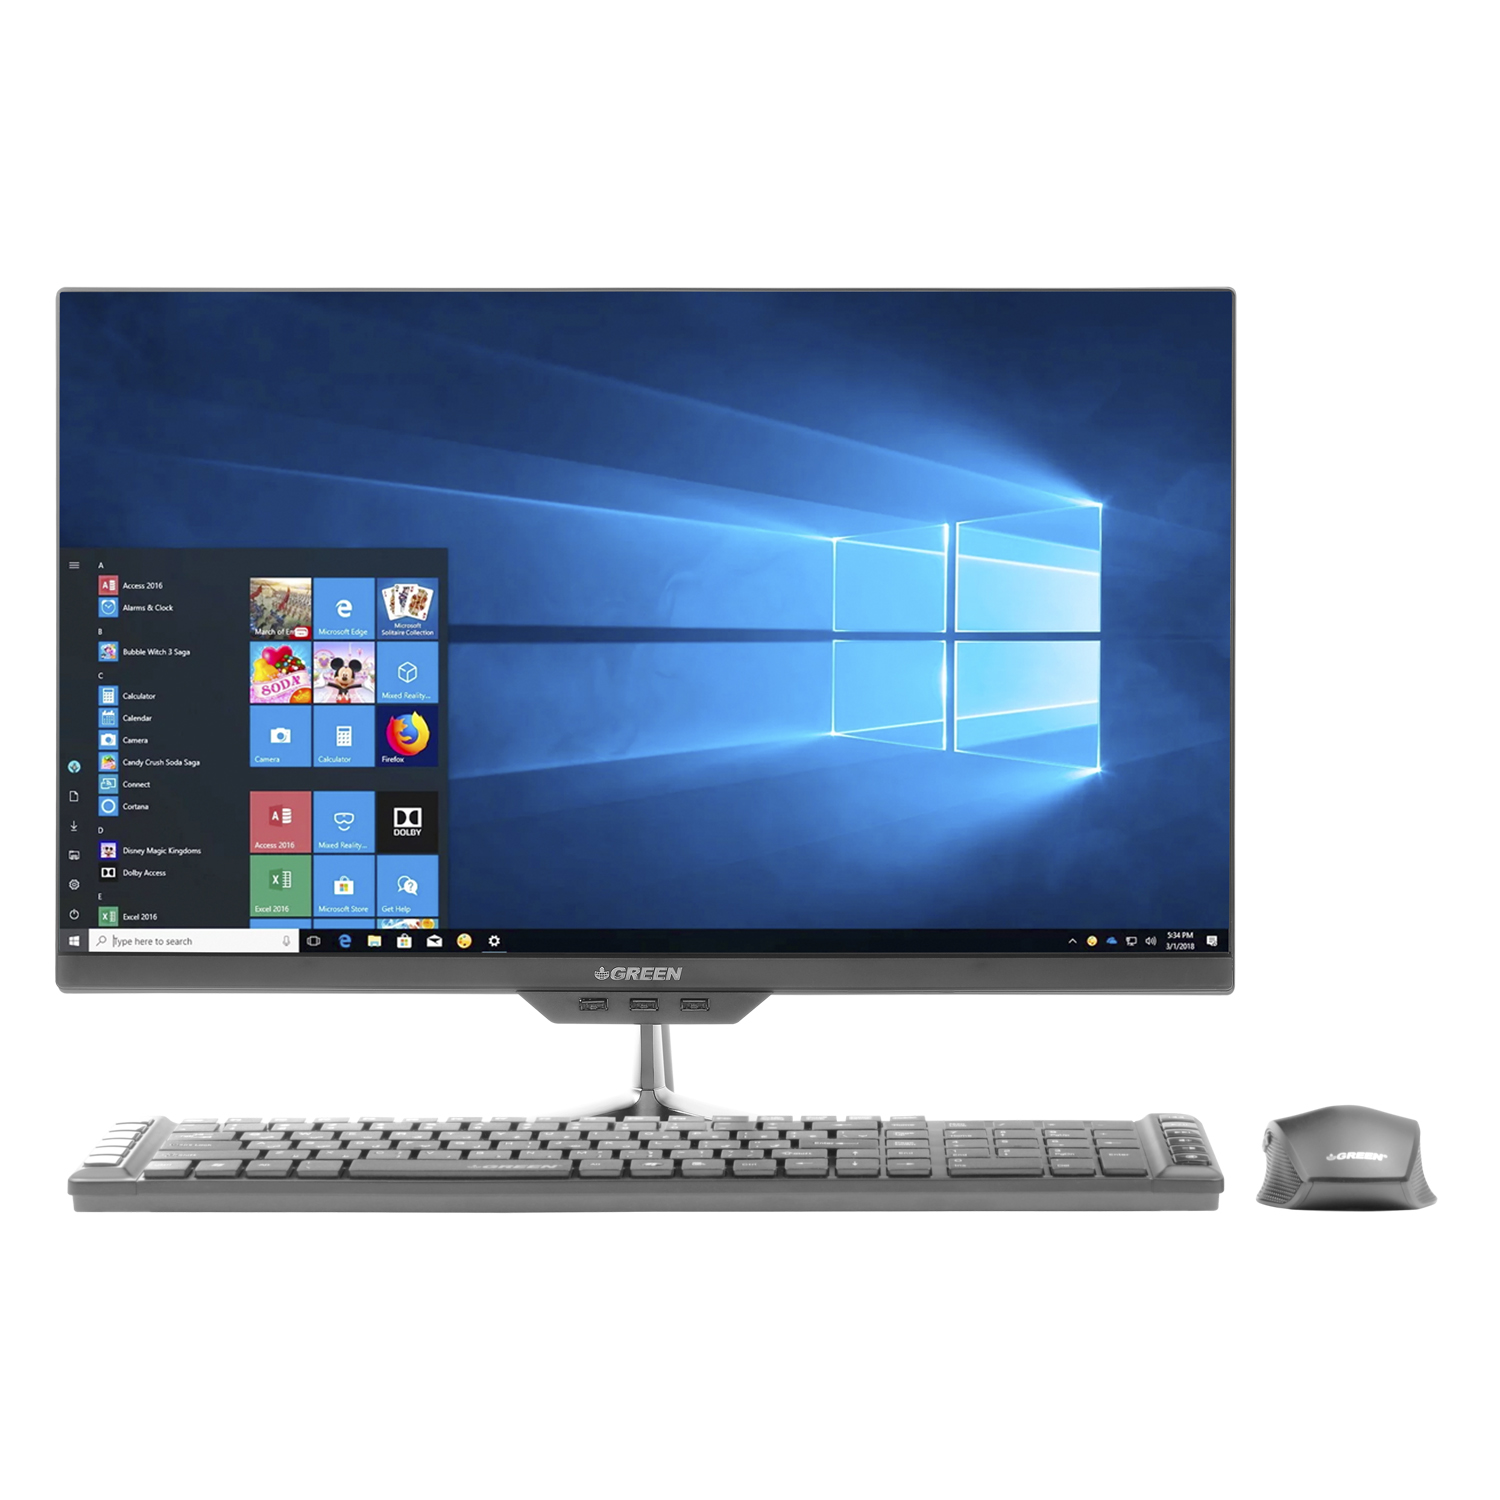 GX424-P14 – All in One PC